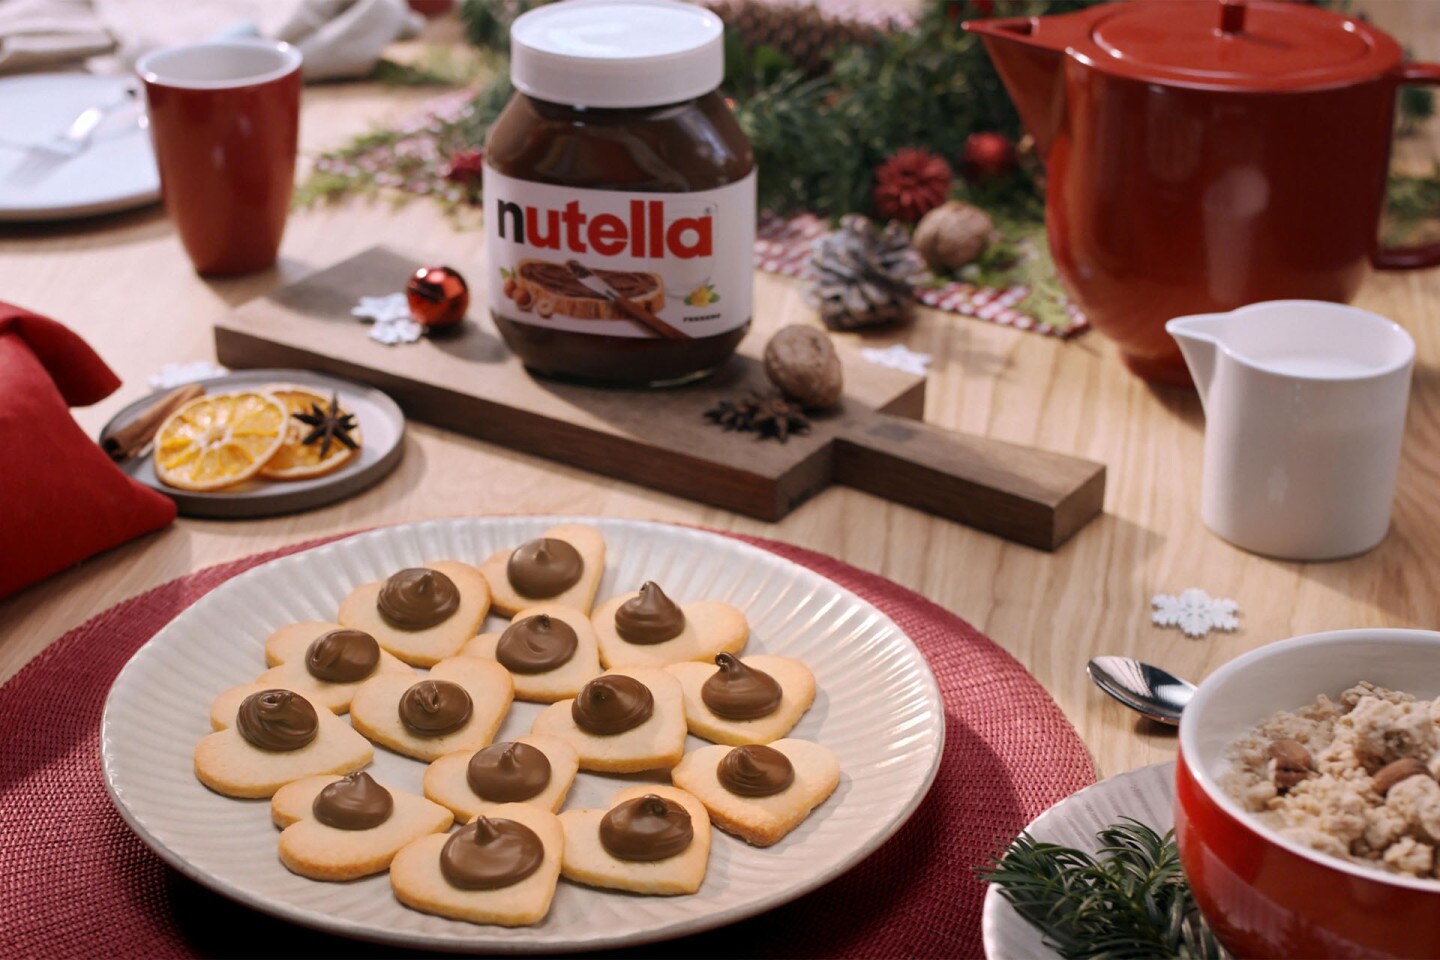 Heart cookies by Nutella recipe | Nutella